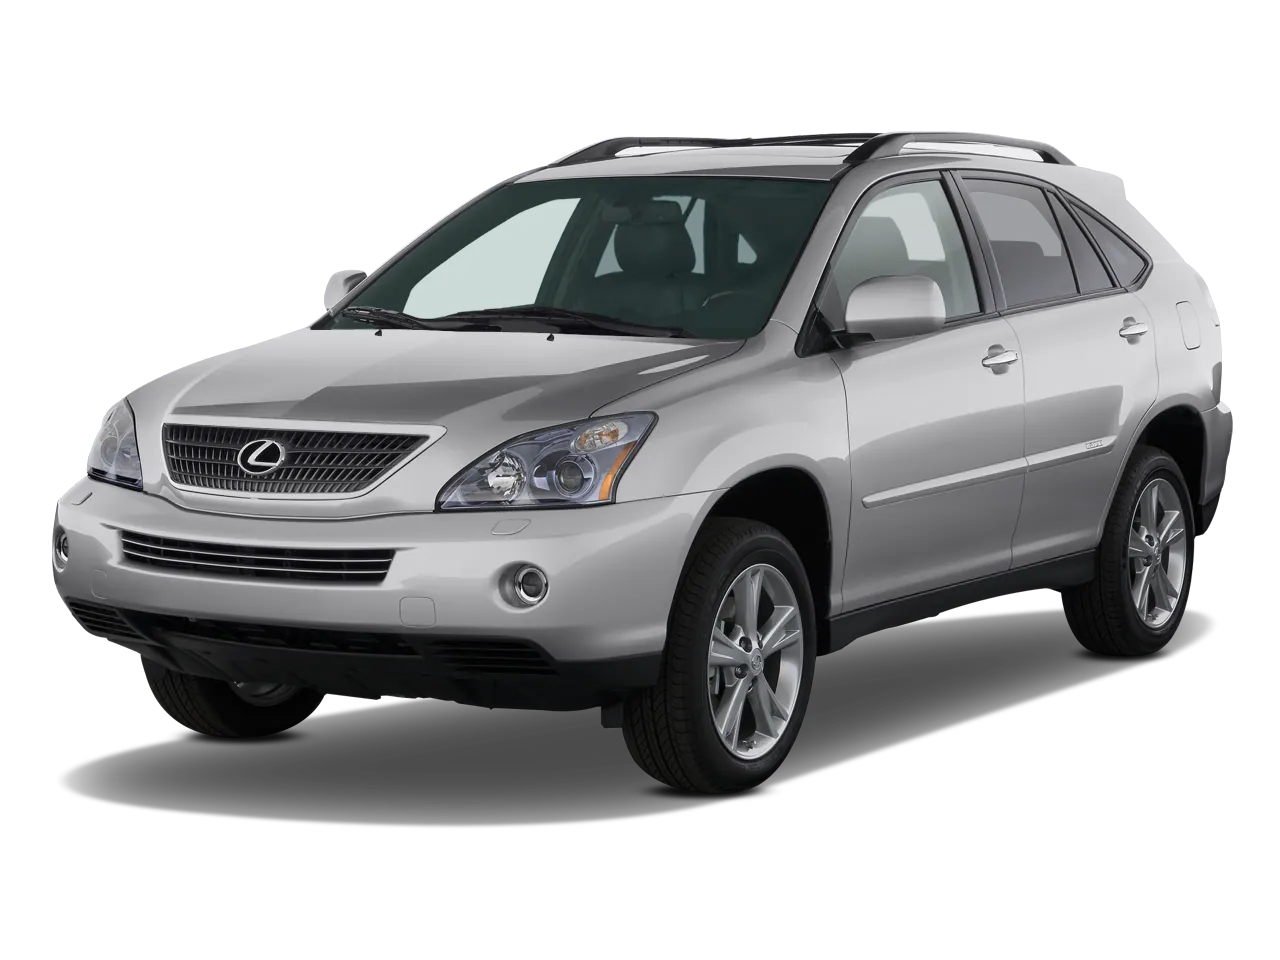 New Hybrid Battery to suit Lexus RX400H (2006-2008)